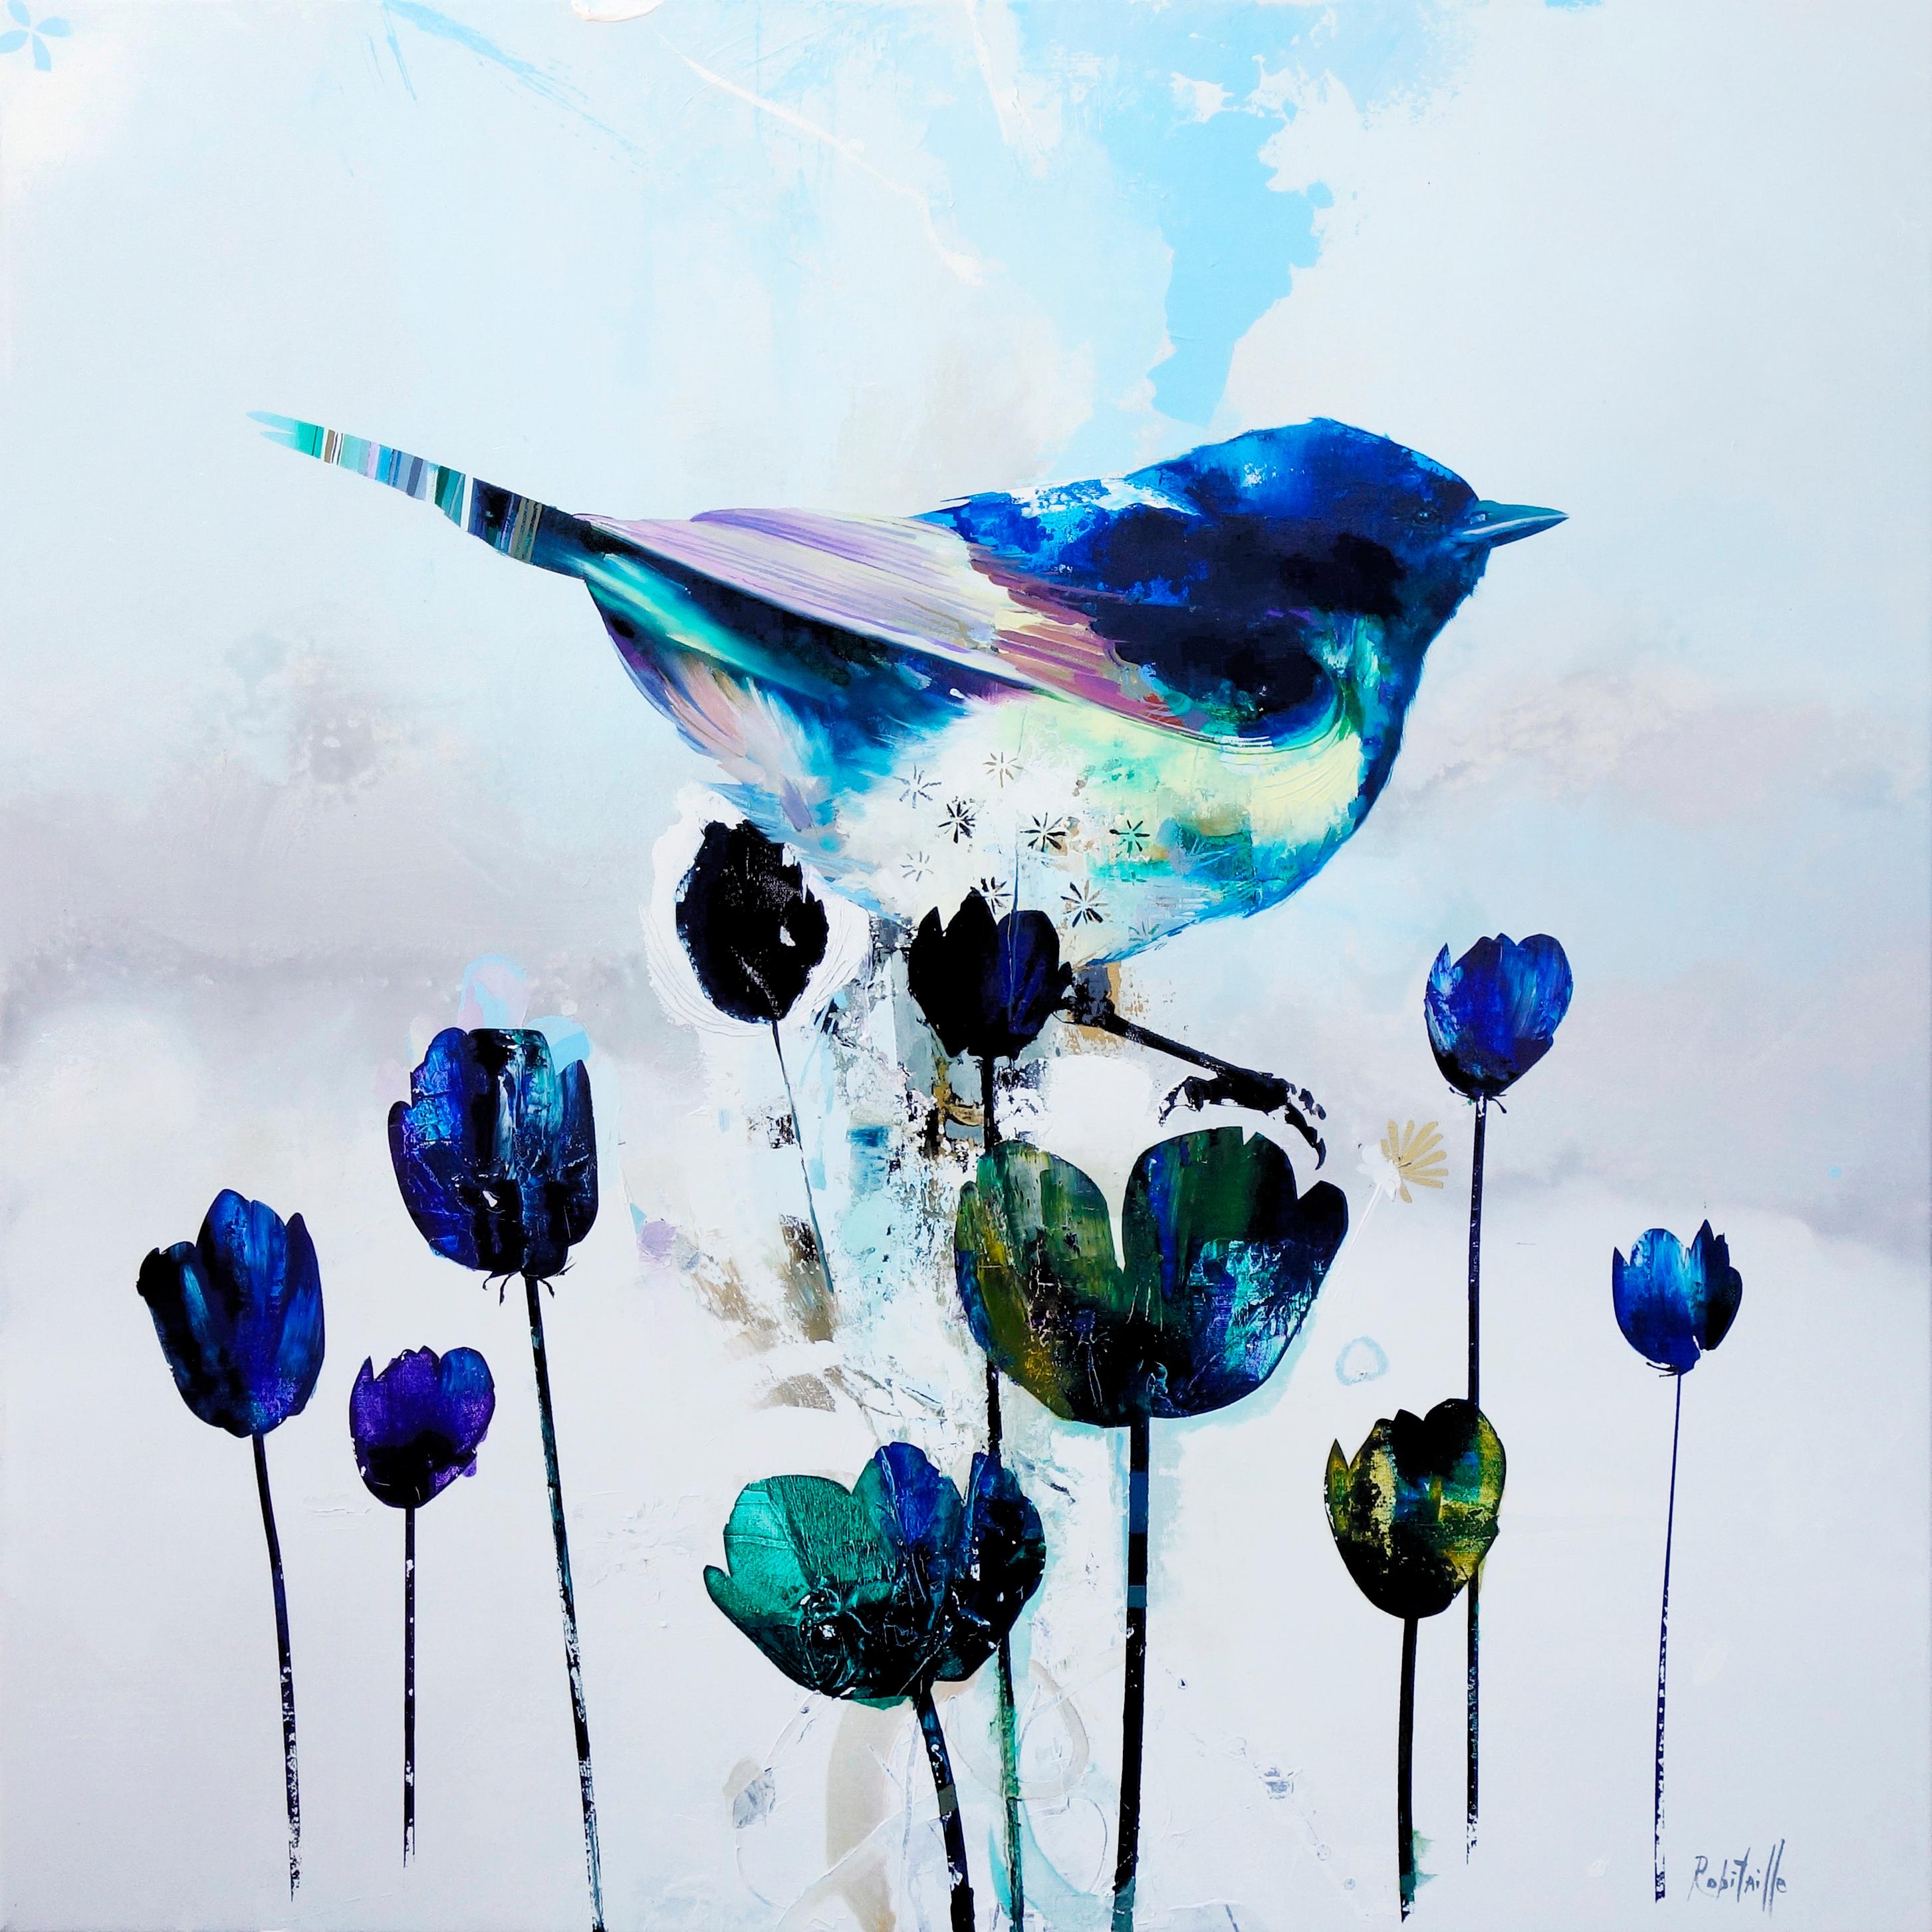 Eric Robitaille Animal Painting - "Blue Free Will" Square realist abstract oil painting with blue bird and flowers